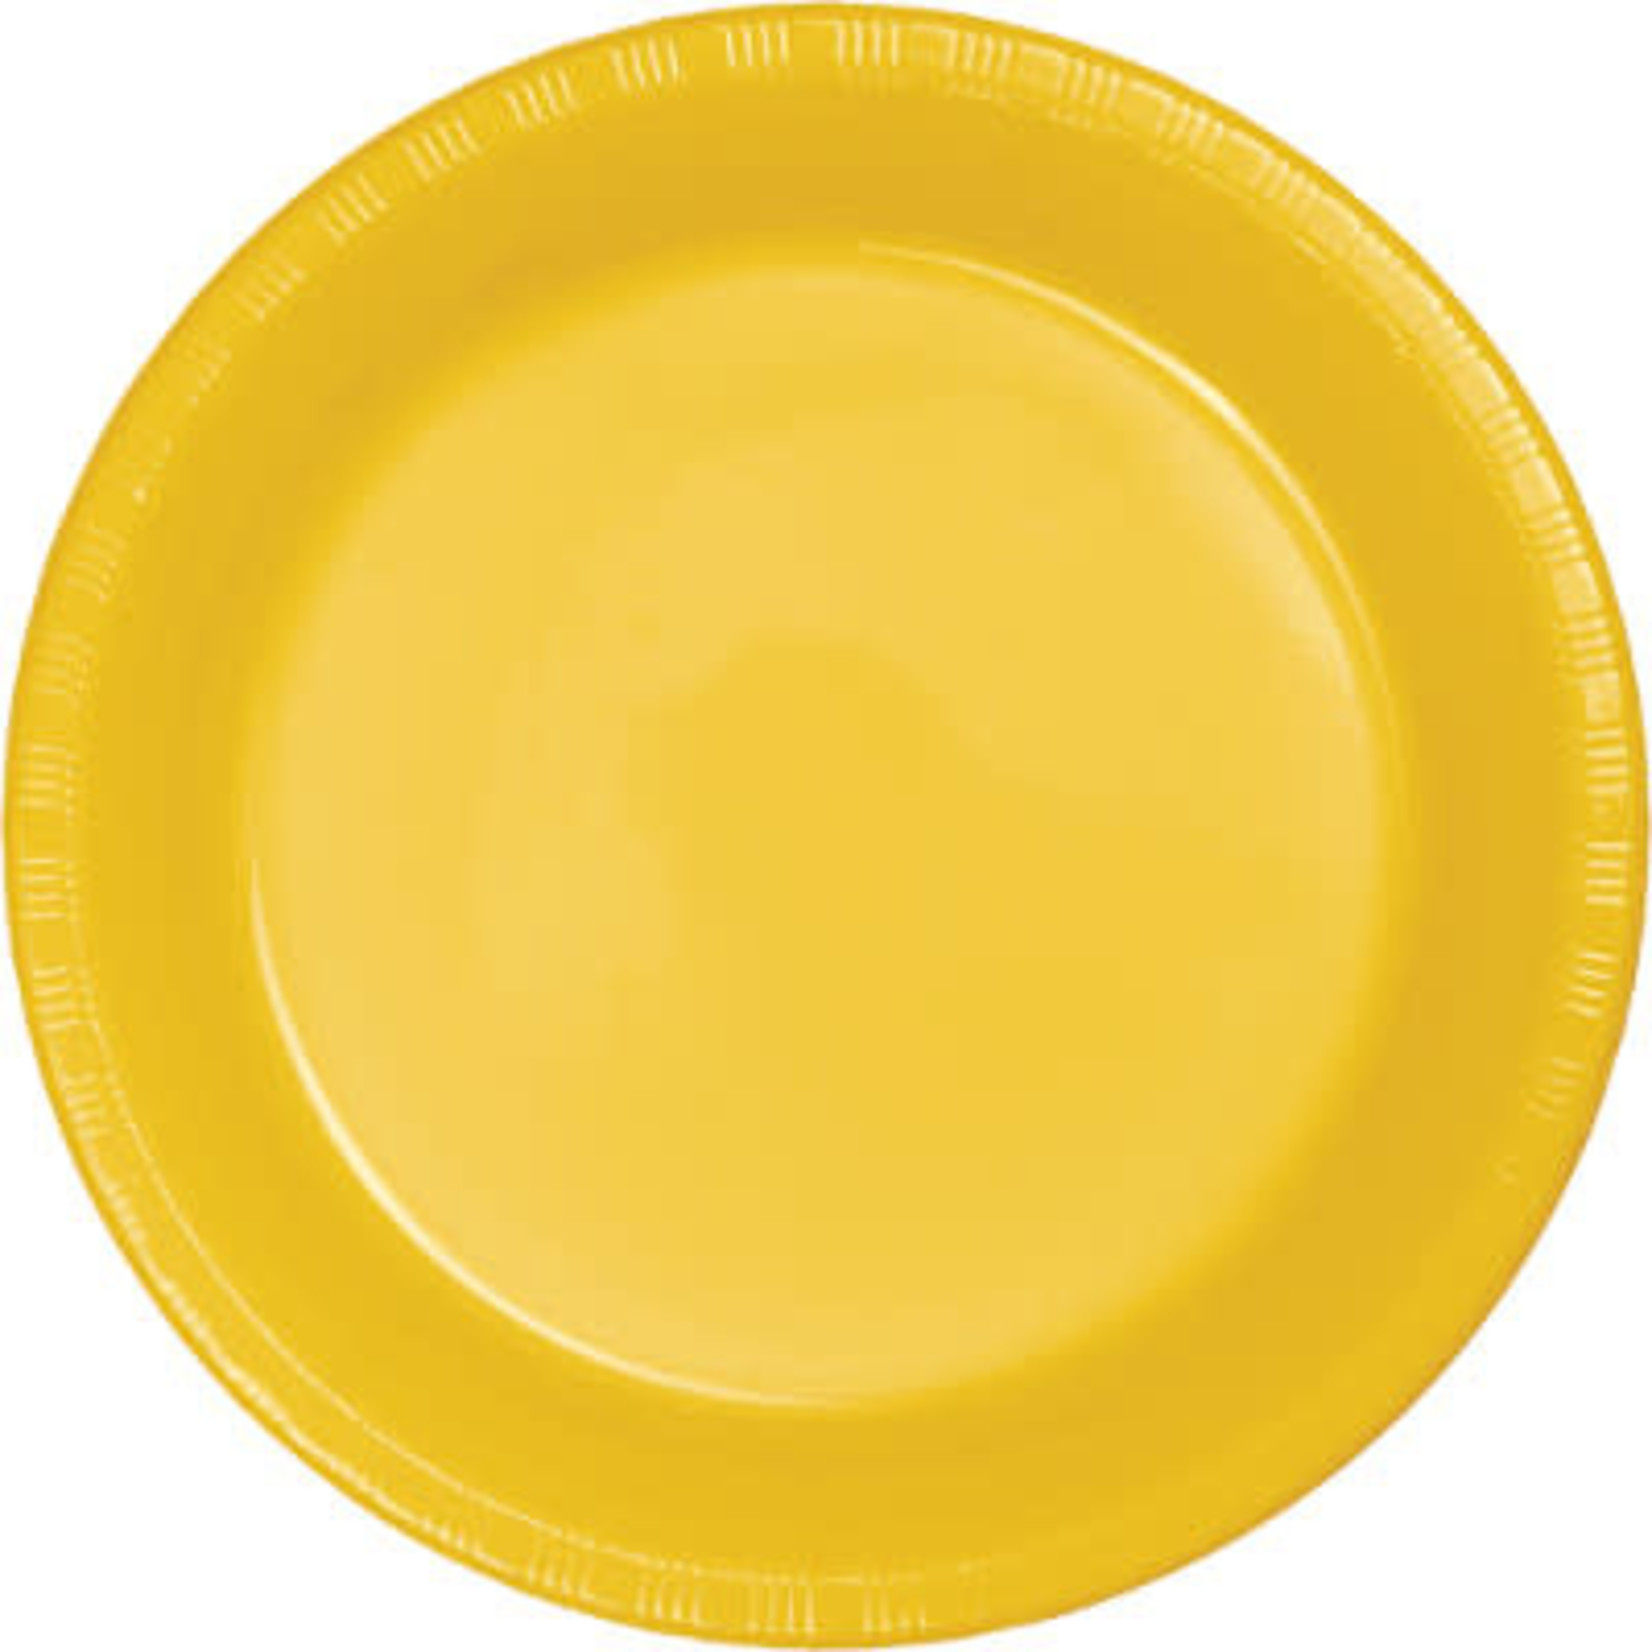 Touch of Color 10" School Bus Yellow Plastic Banquet Plates - 20ct.